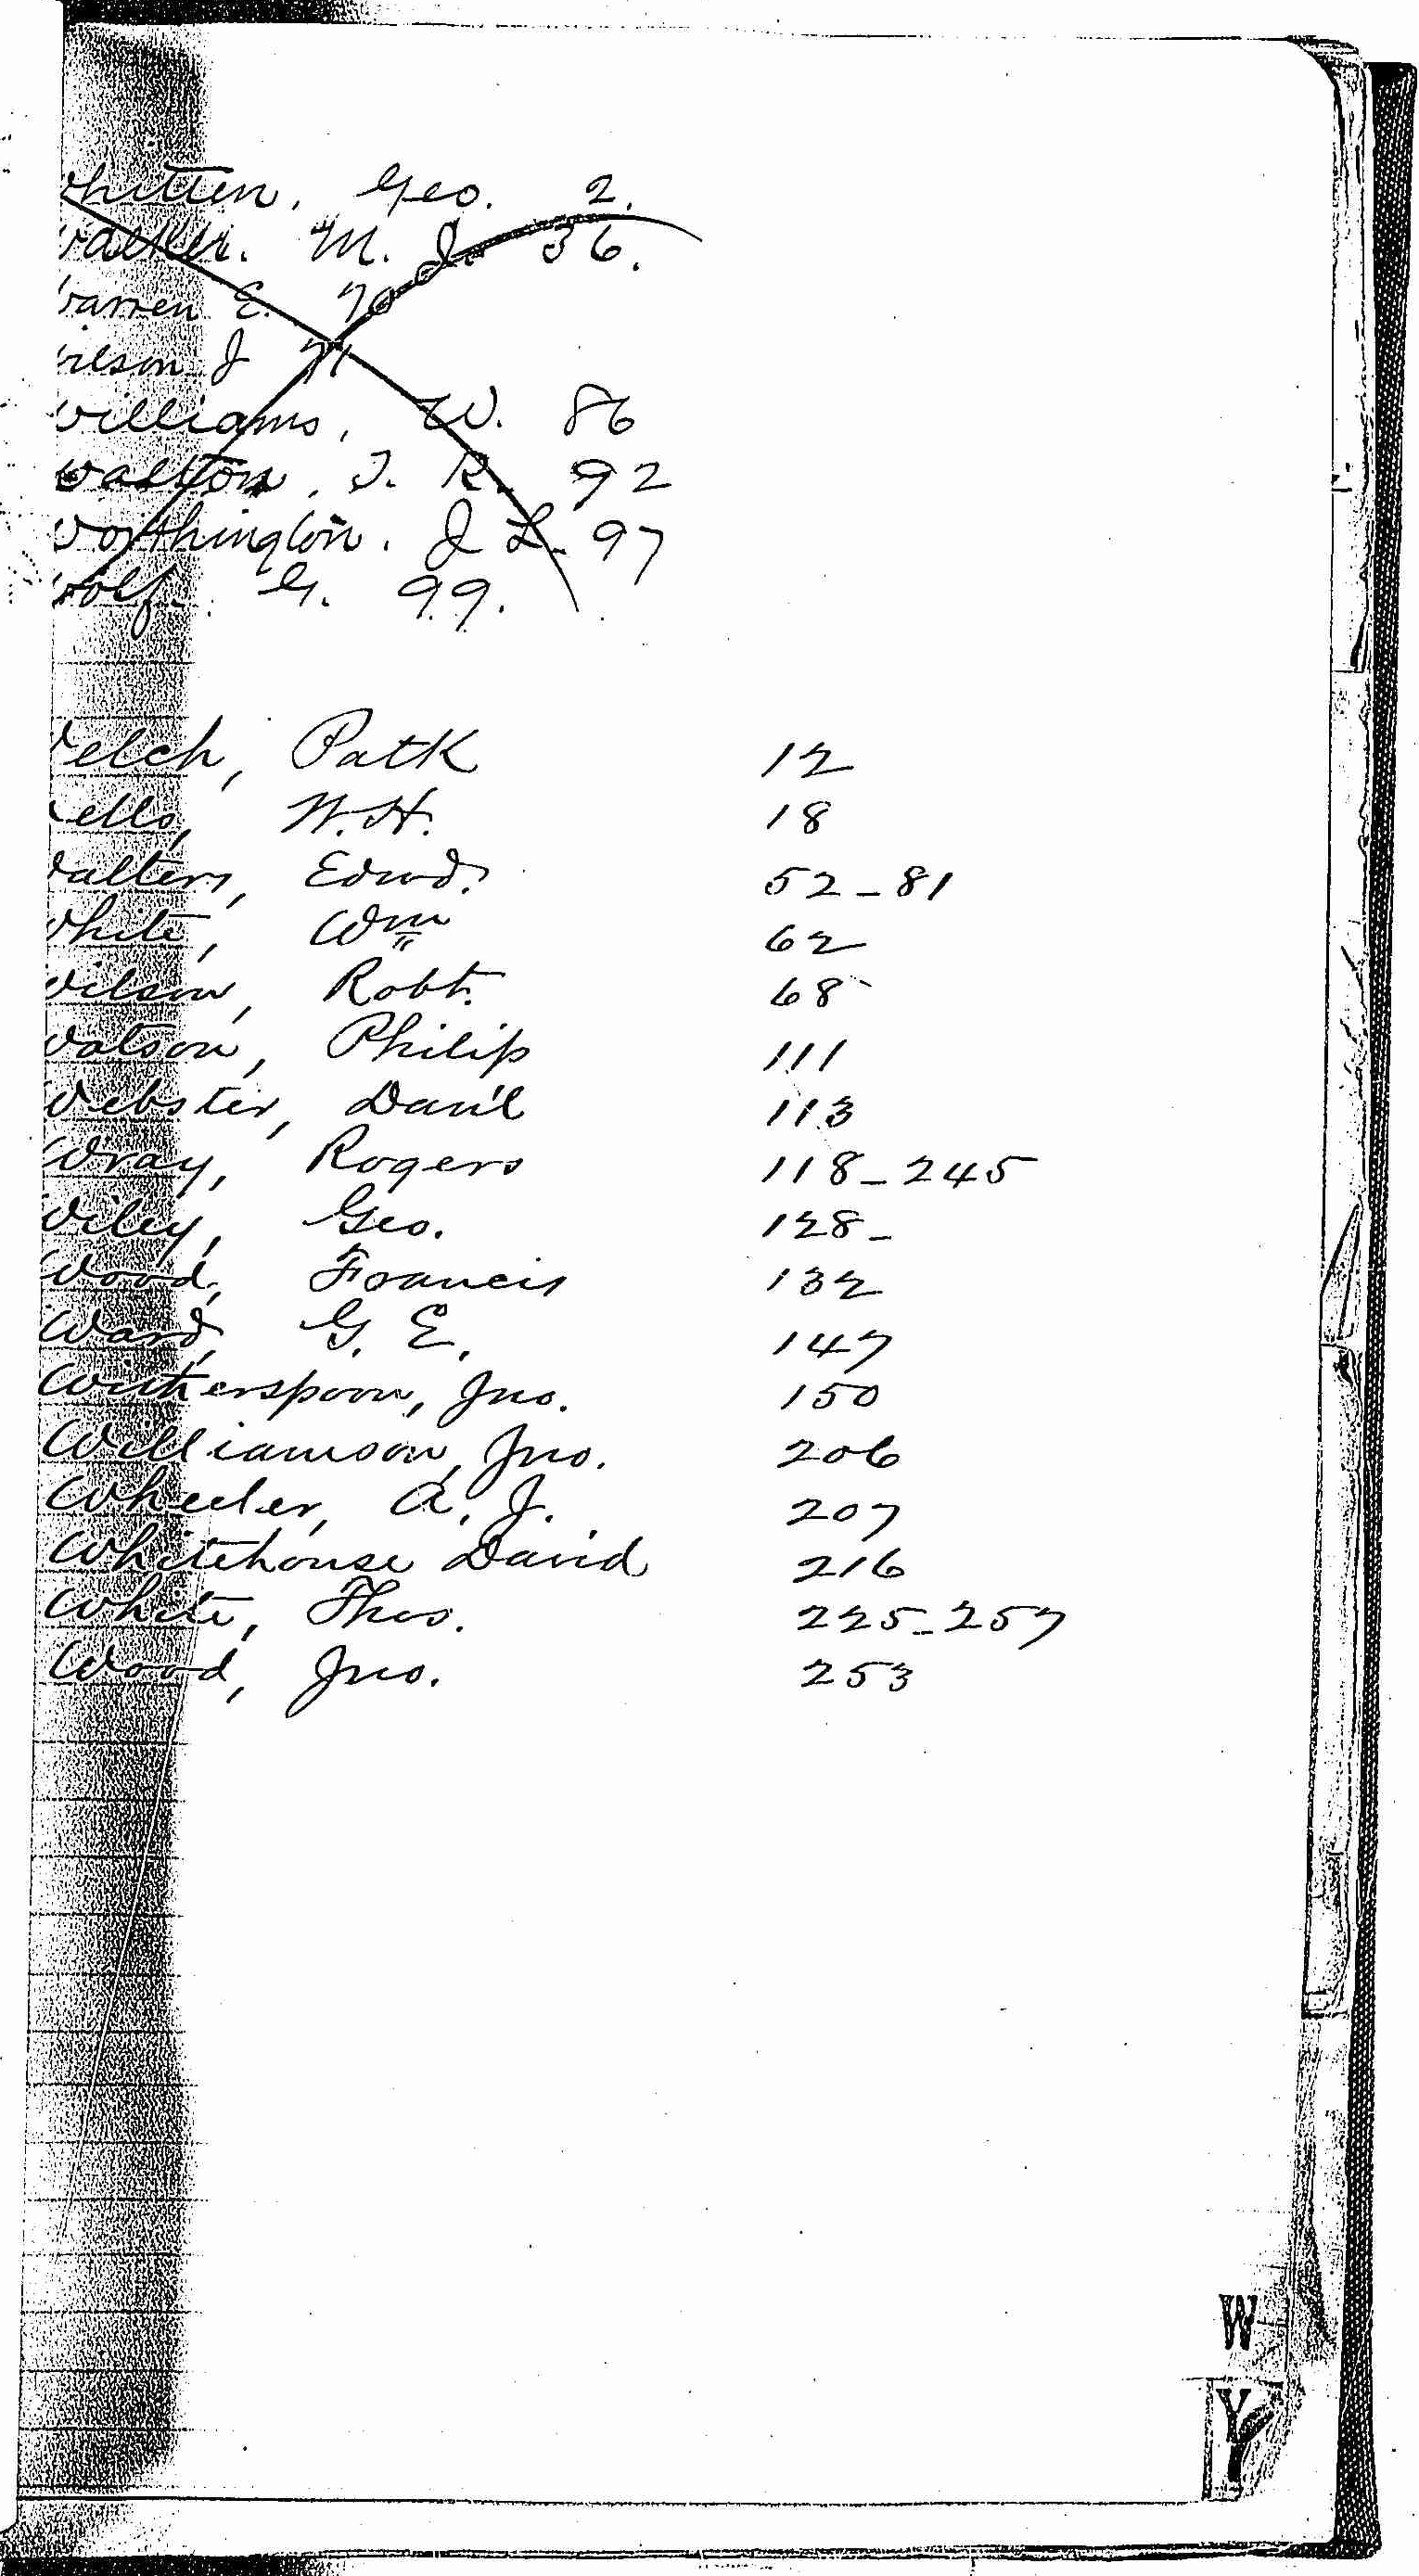 Index of patients - W - in the log Hospital Tickets and Case Papers - Naval Hospital - Washington, D.C. - 1866 to 1868